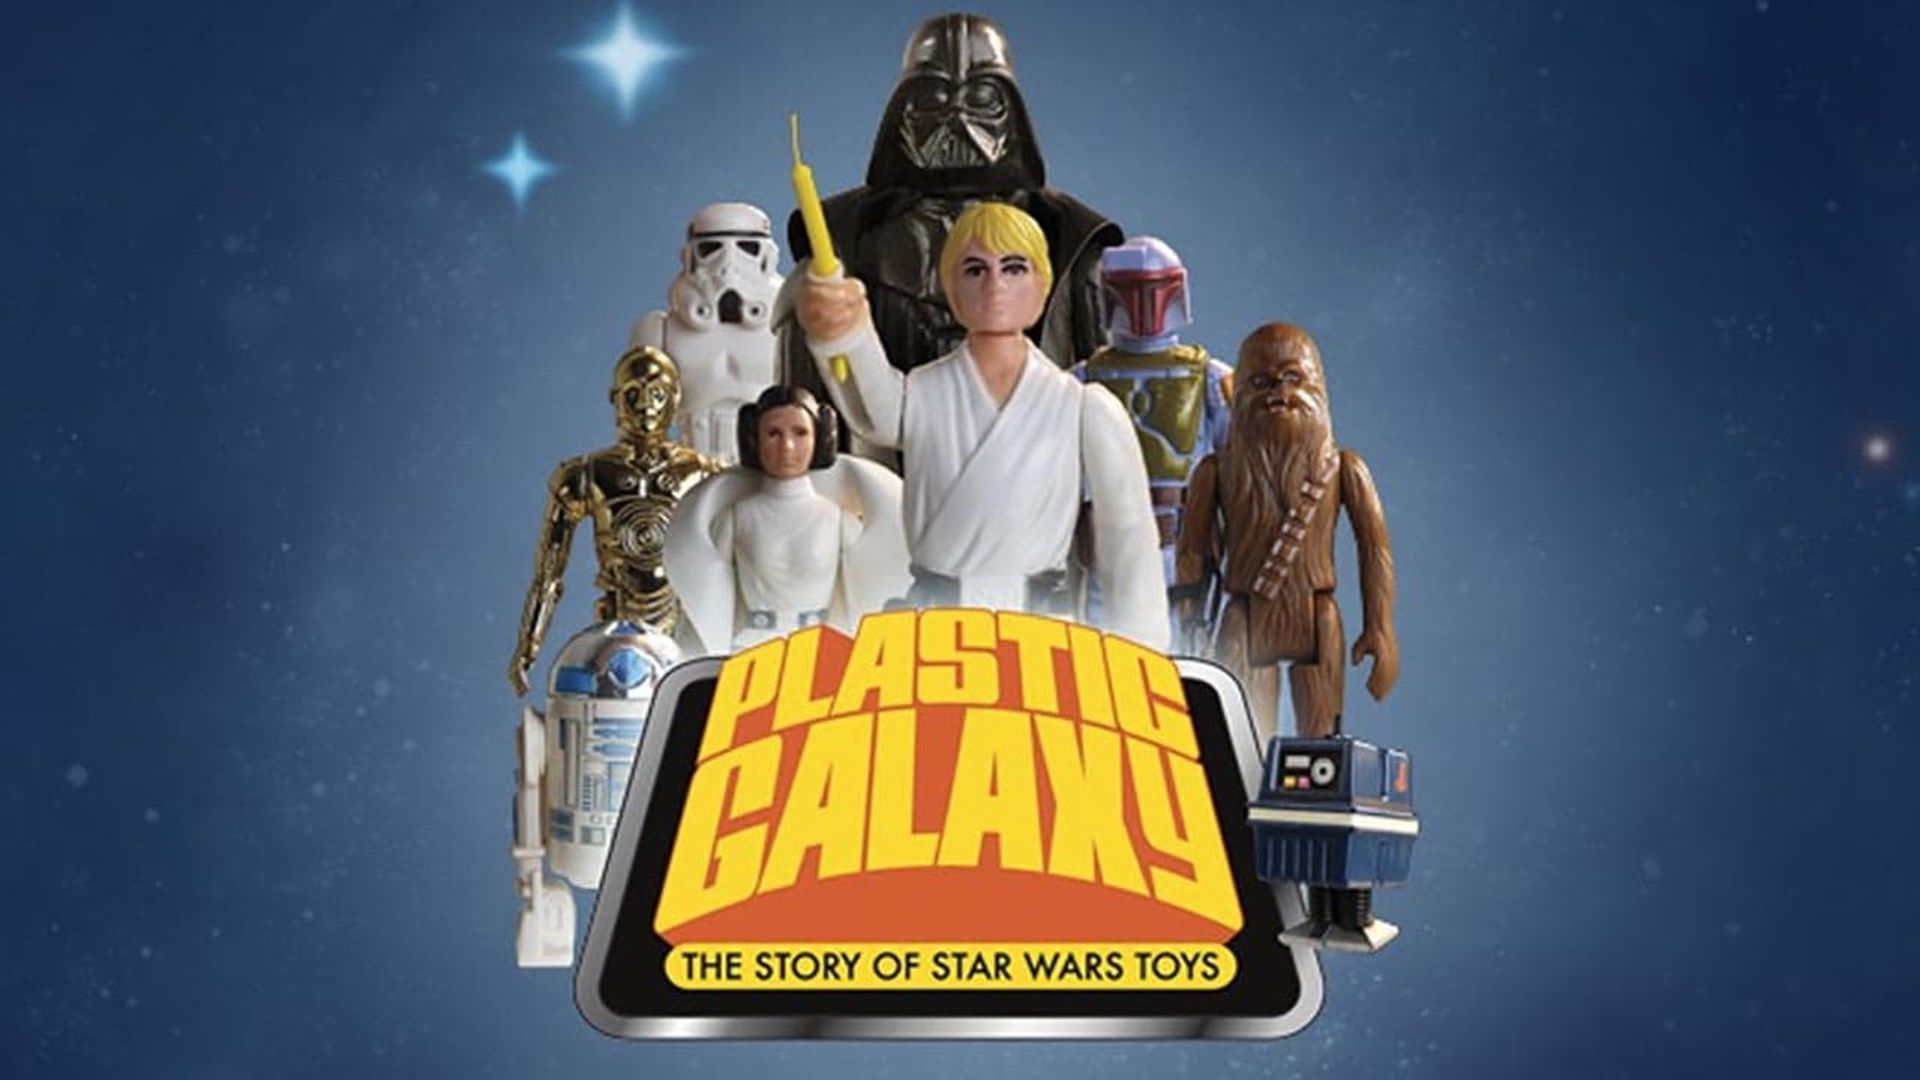 Plastic Galaxy: The Story of Star Wars Toys background